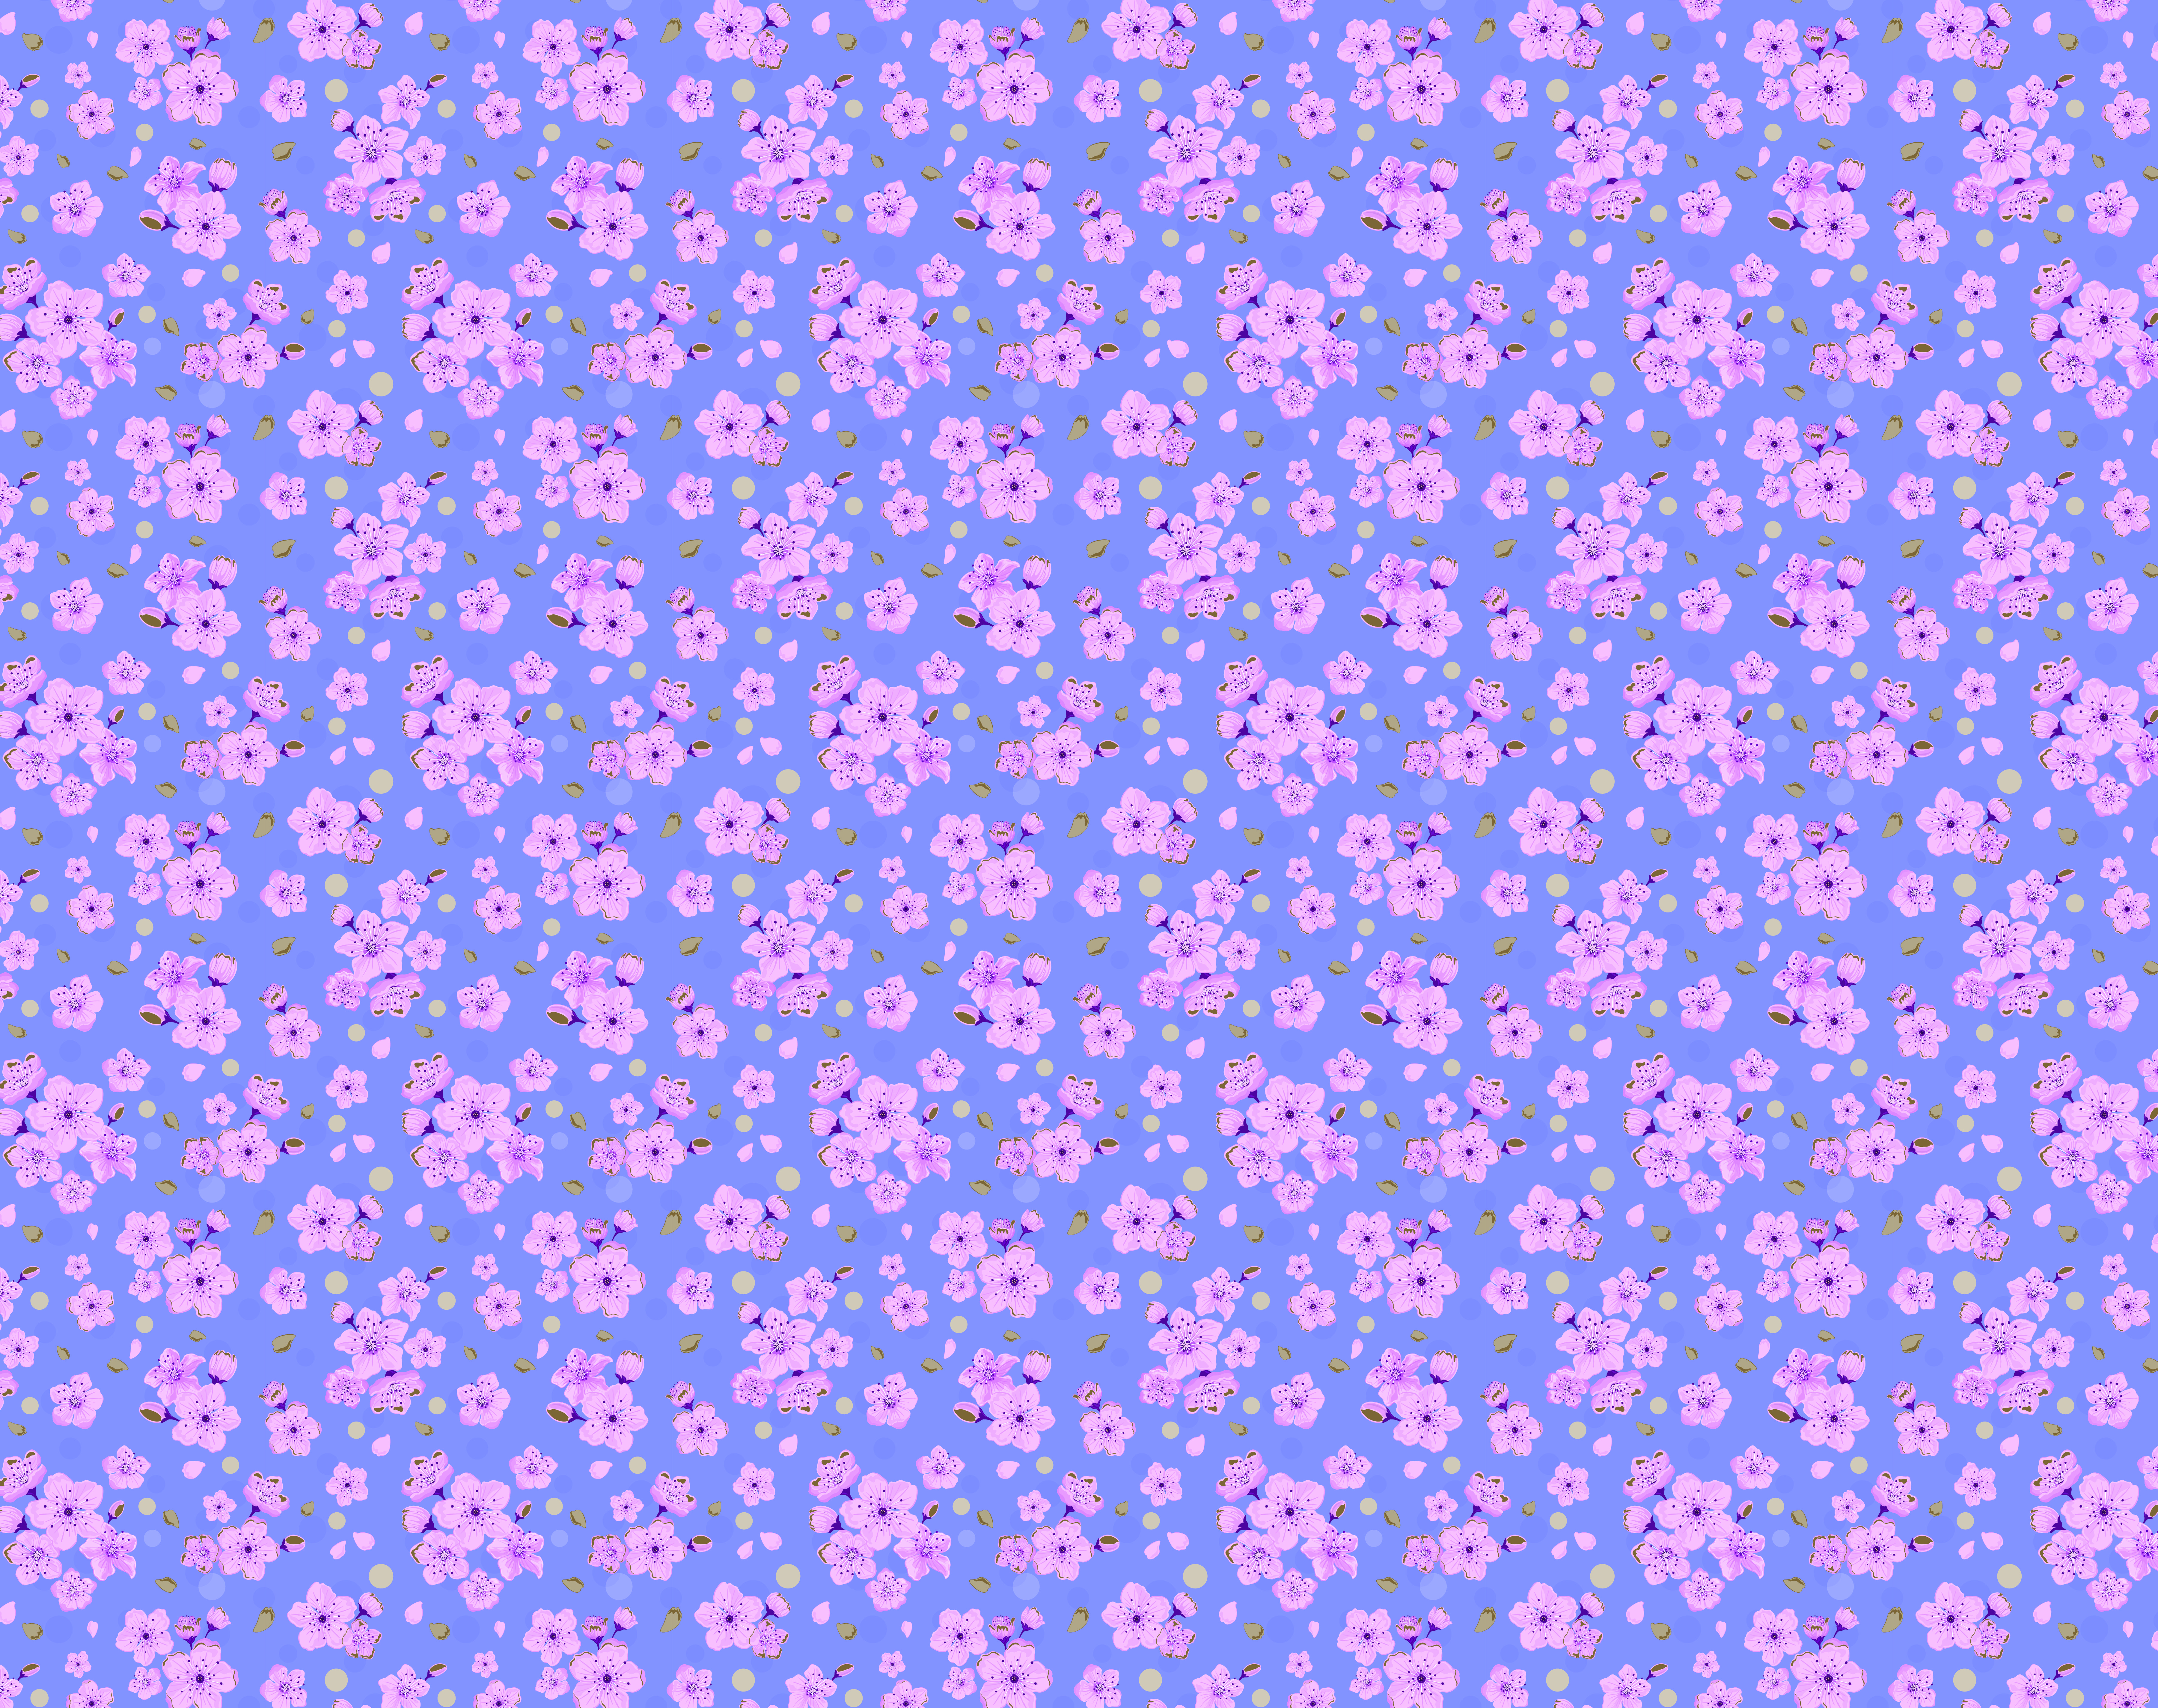 Japanese Flowers Gift Wrapping Papers - 12 sheets